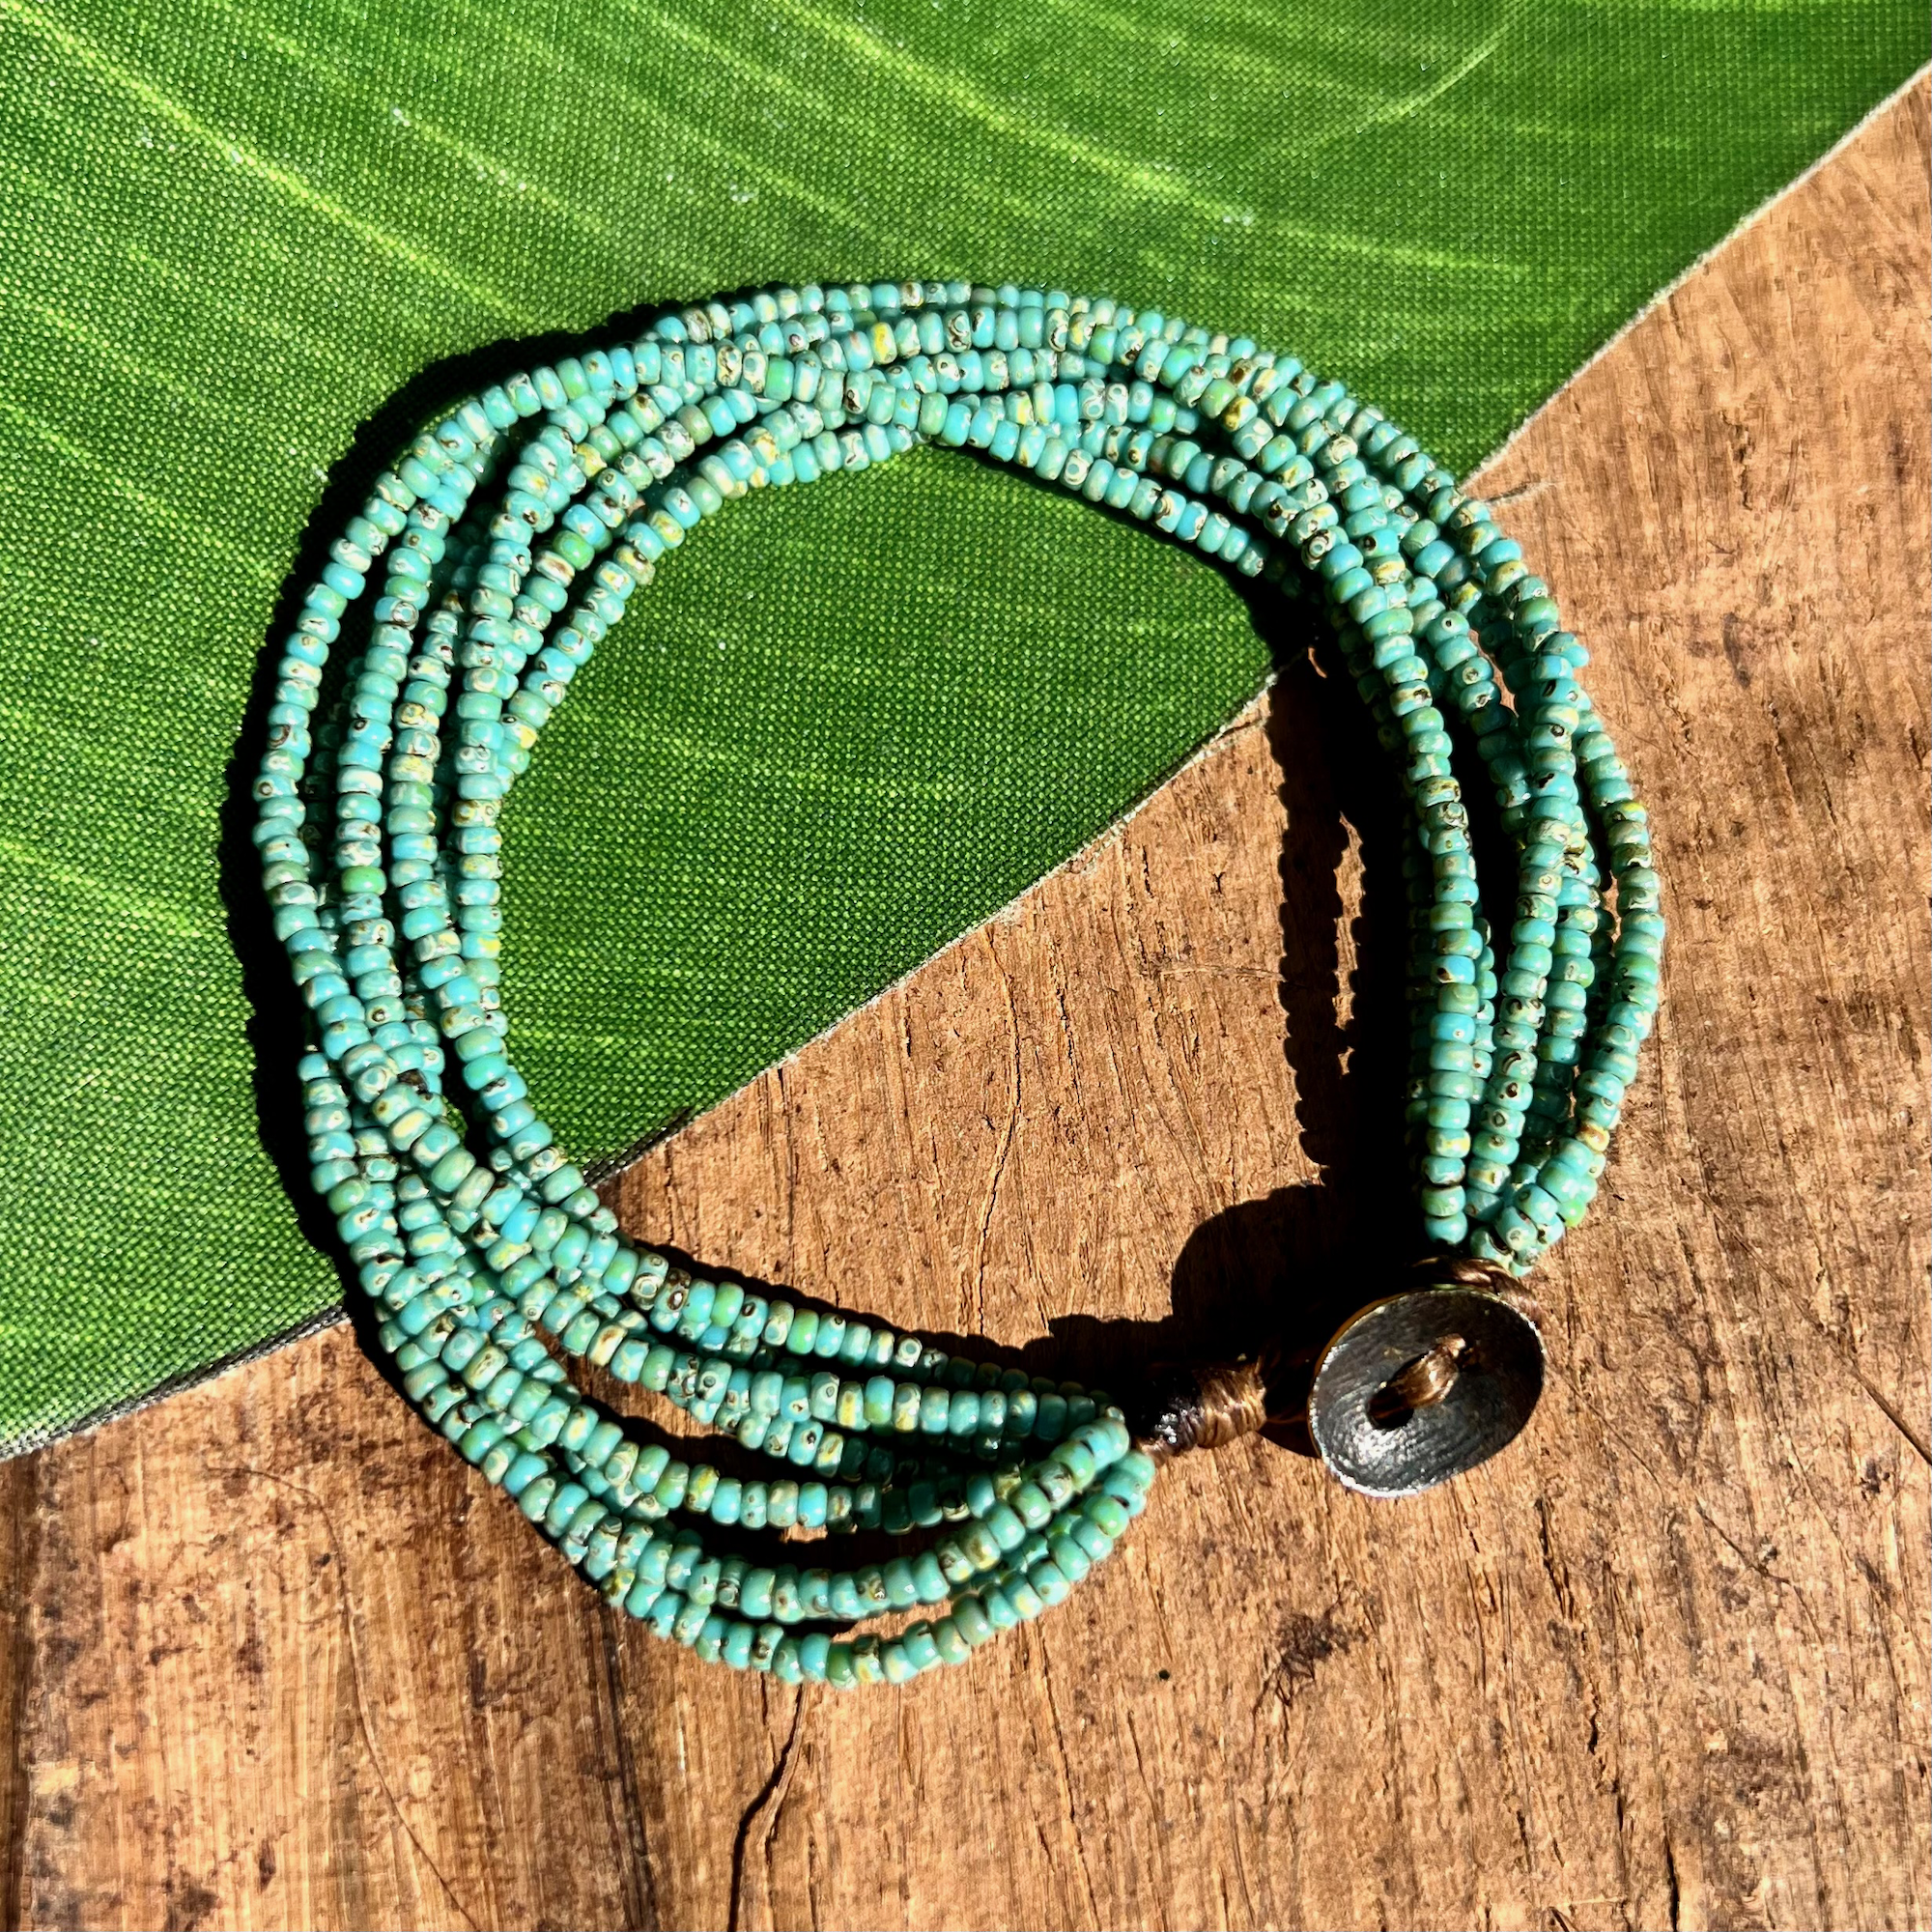 Turquoise Picasso Seed Bead Bracelet